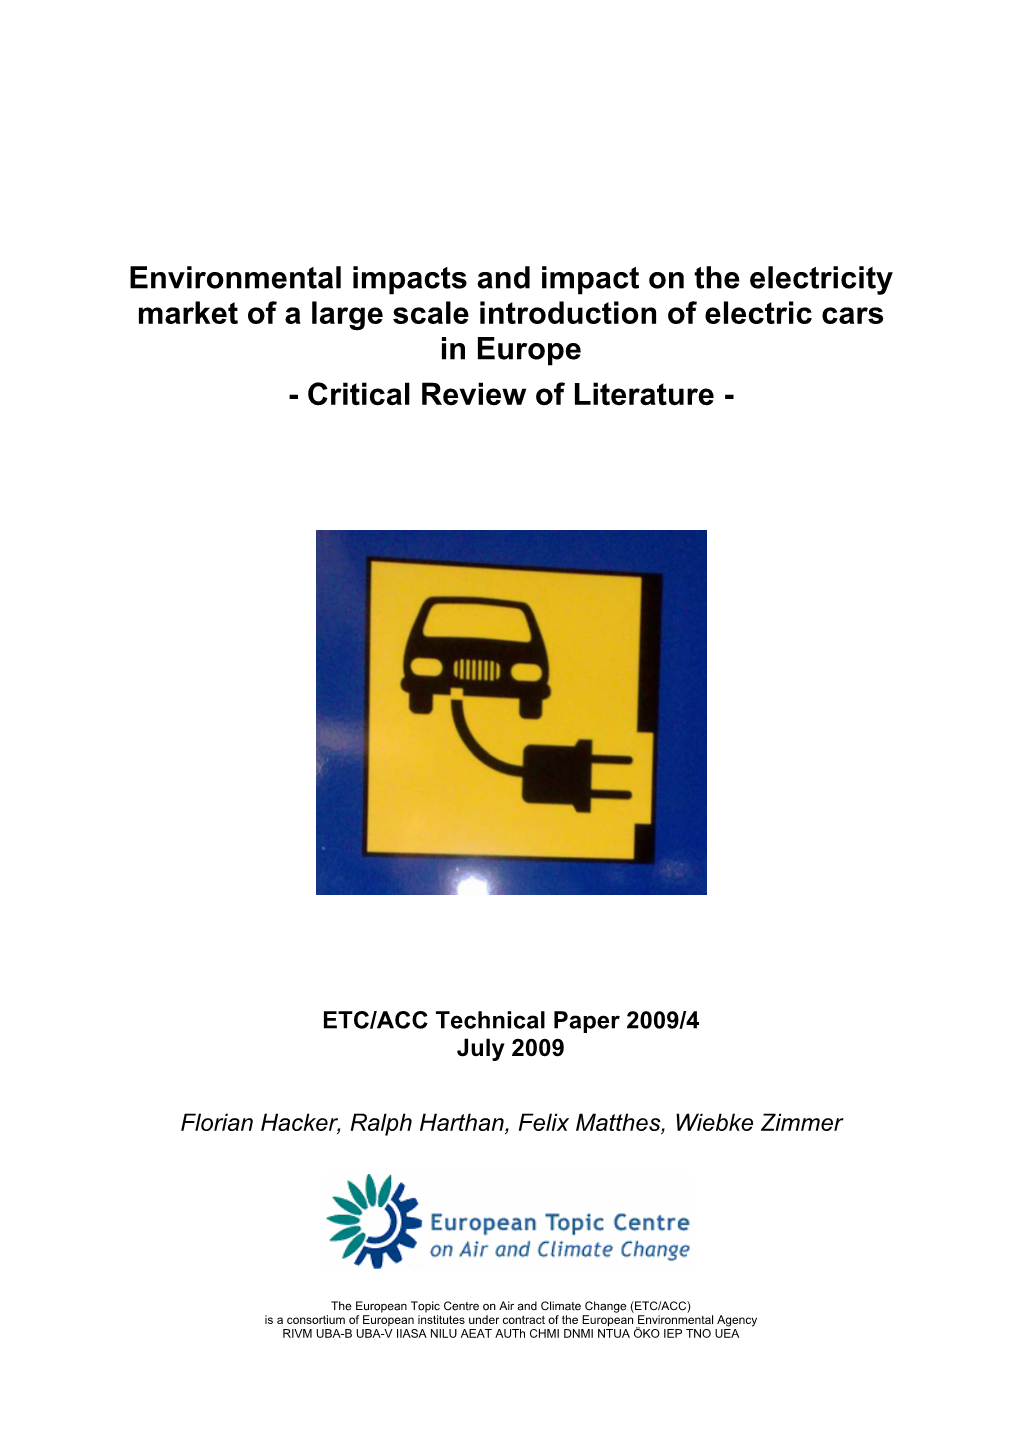 Environmental Impacts and Impact on the Electricity Market of a Large Scale Introduction of Electric Cars in Europe - Critical Review of Literature